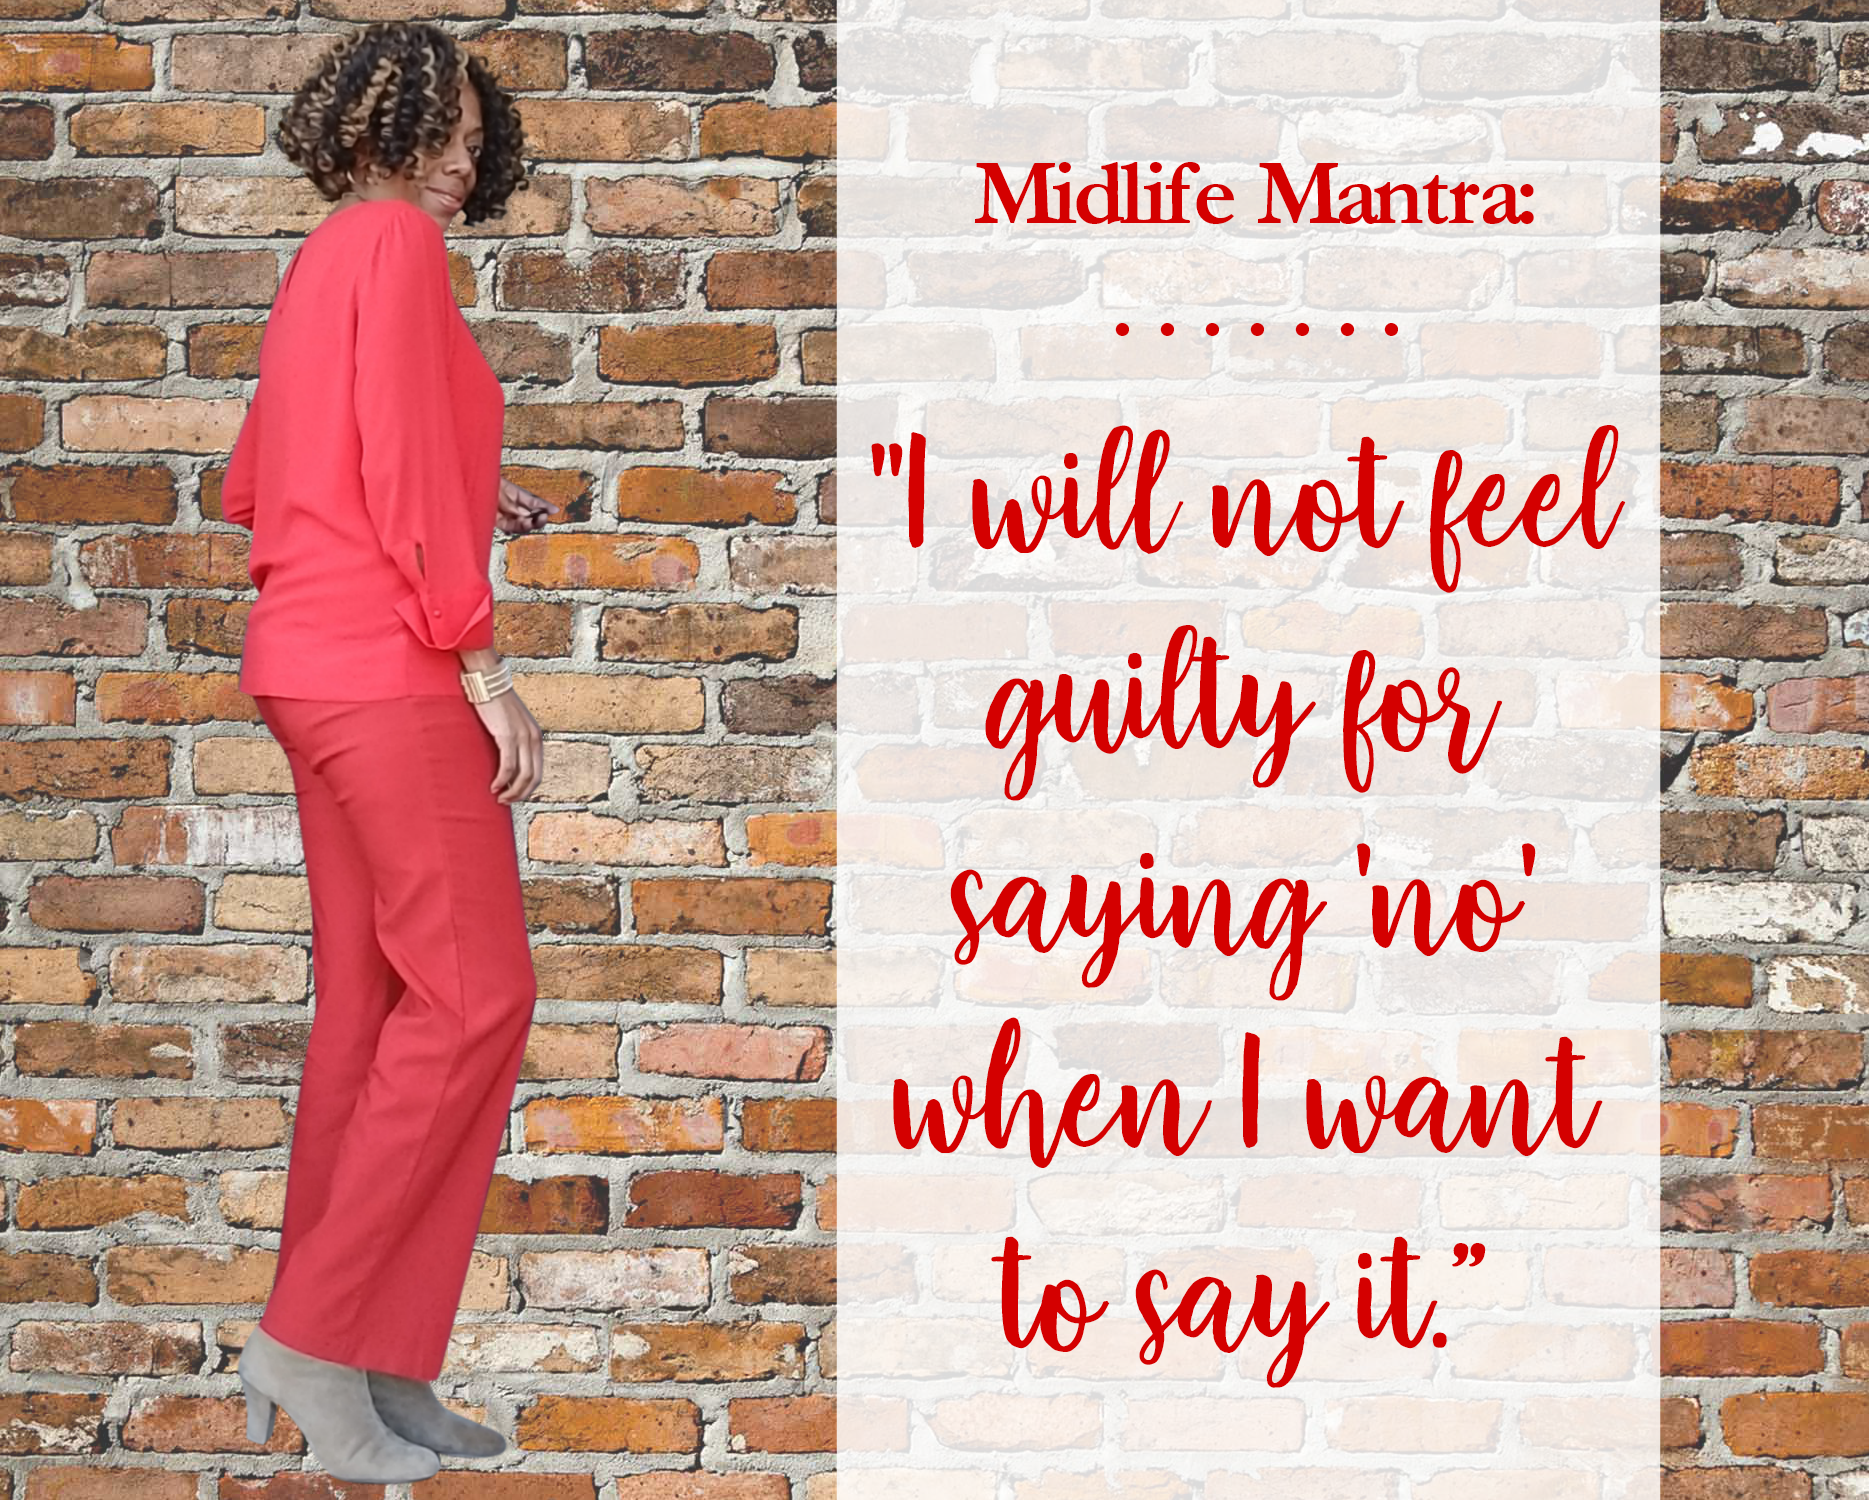 Midlife Mantra: Saying “No” Without the Guilt